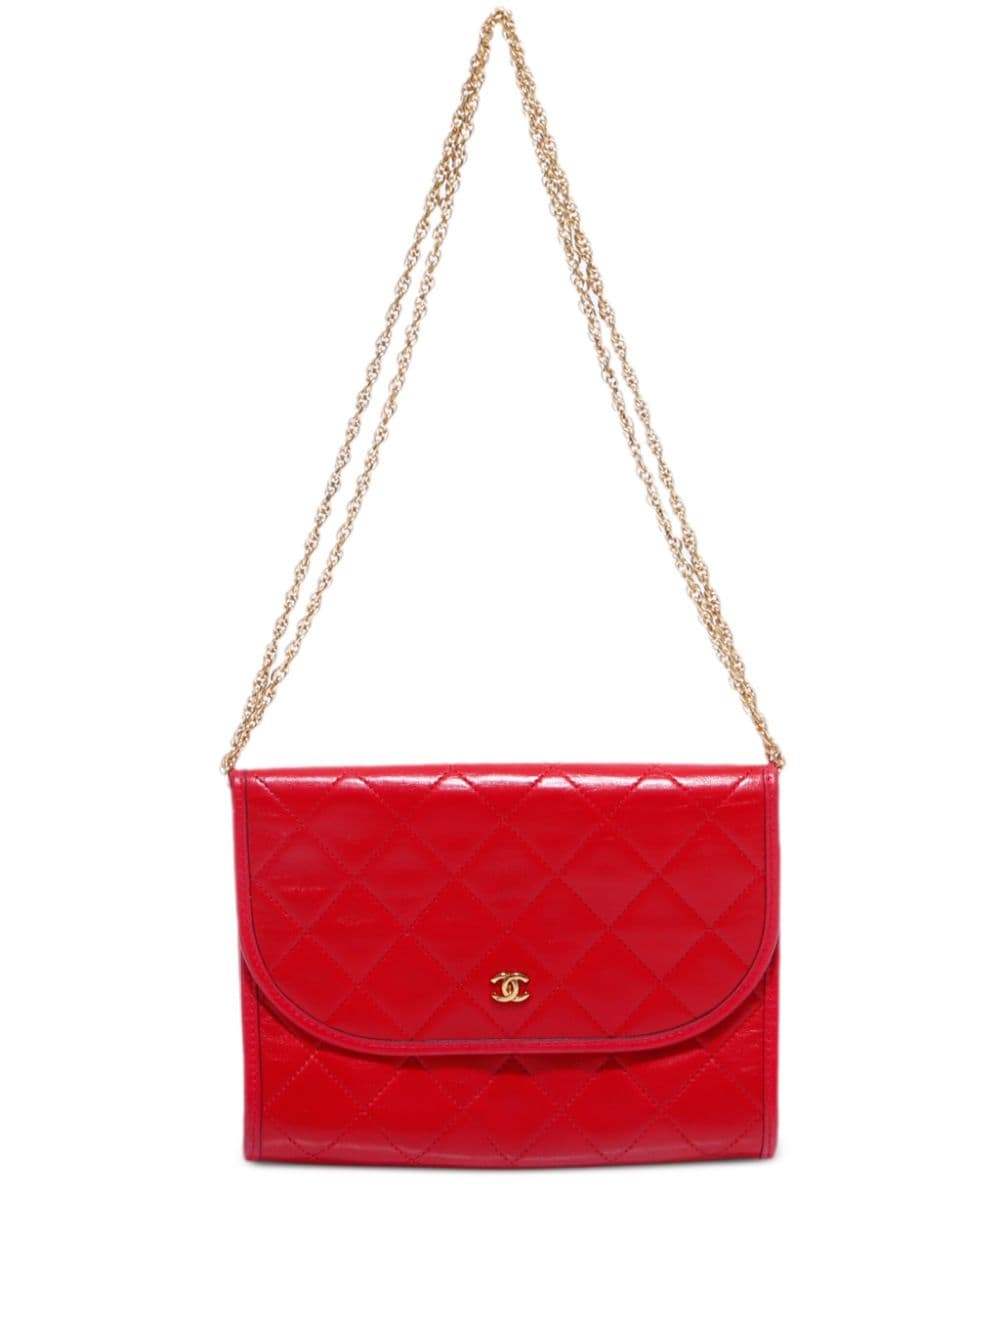 Pre-owned Chanel Cc 菱纹绗缝单肩包（1990年代典藏款） In Red